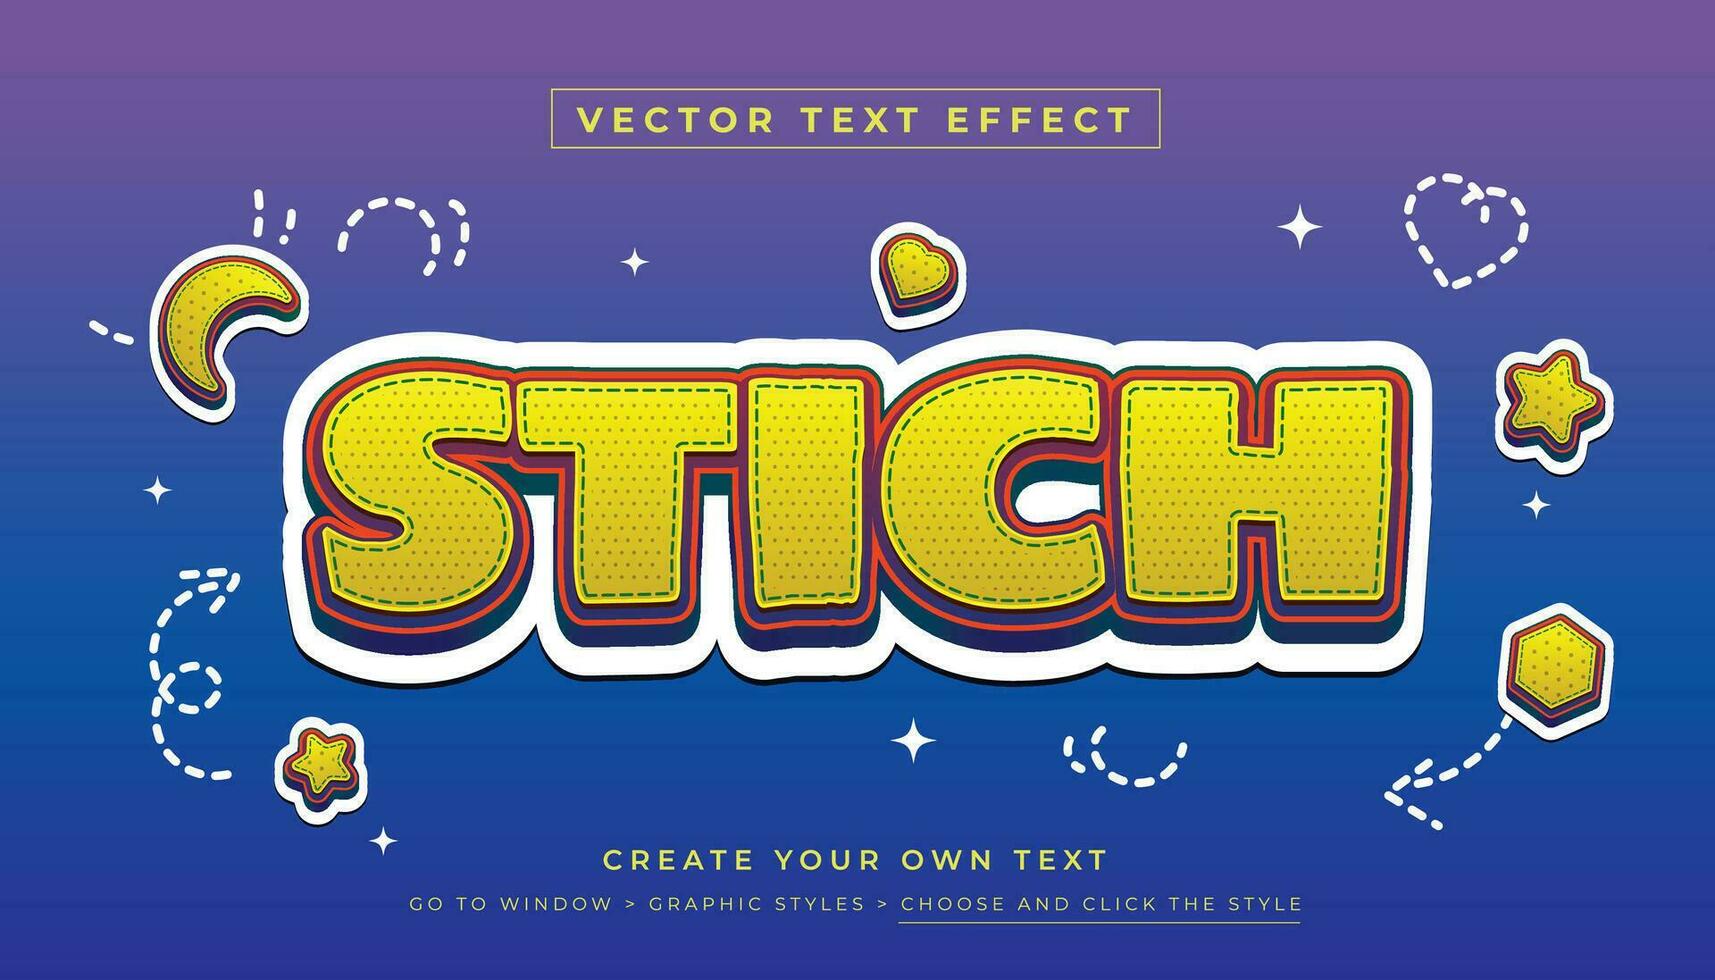 Vector Editable 3D stitch text effect. Yellow fun stich graphic style on abstract blue background